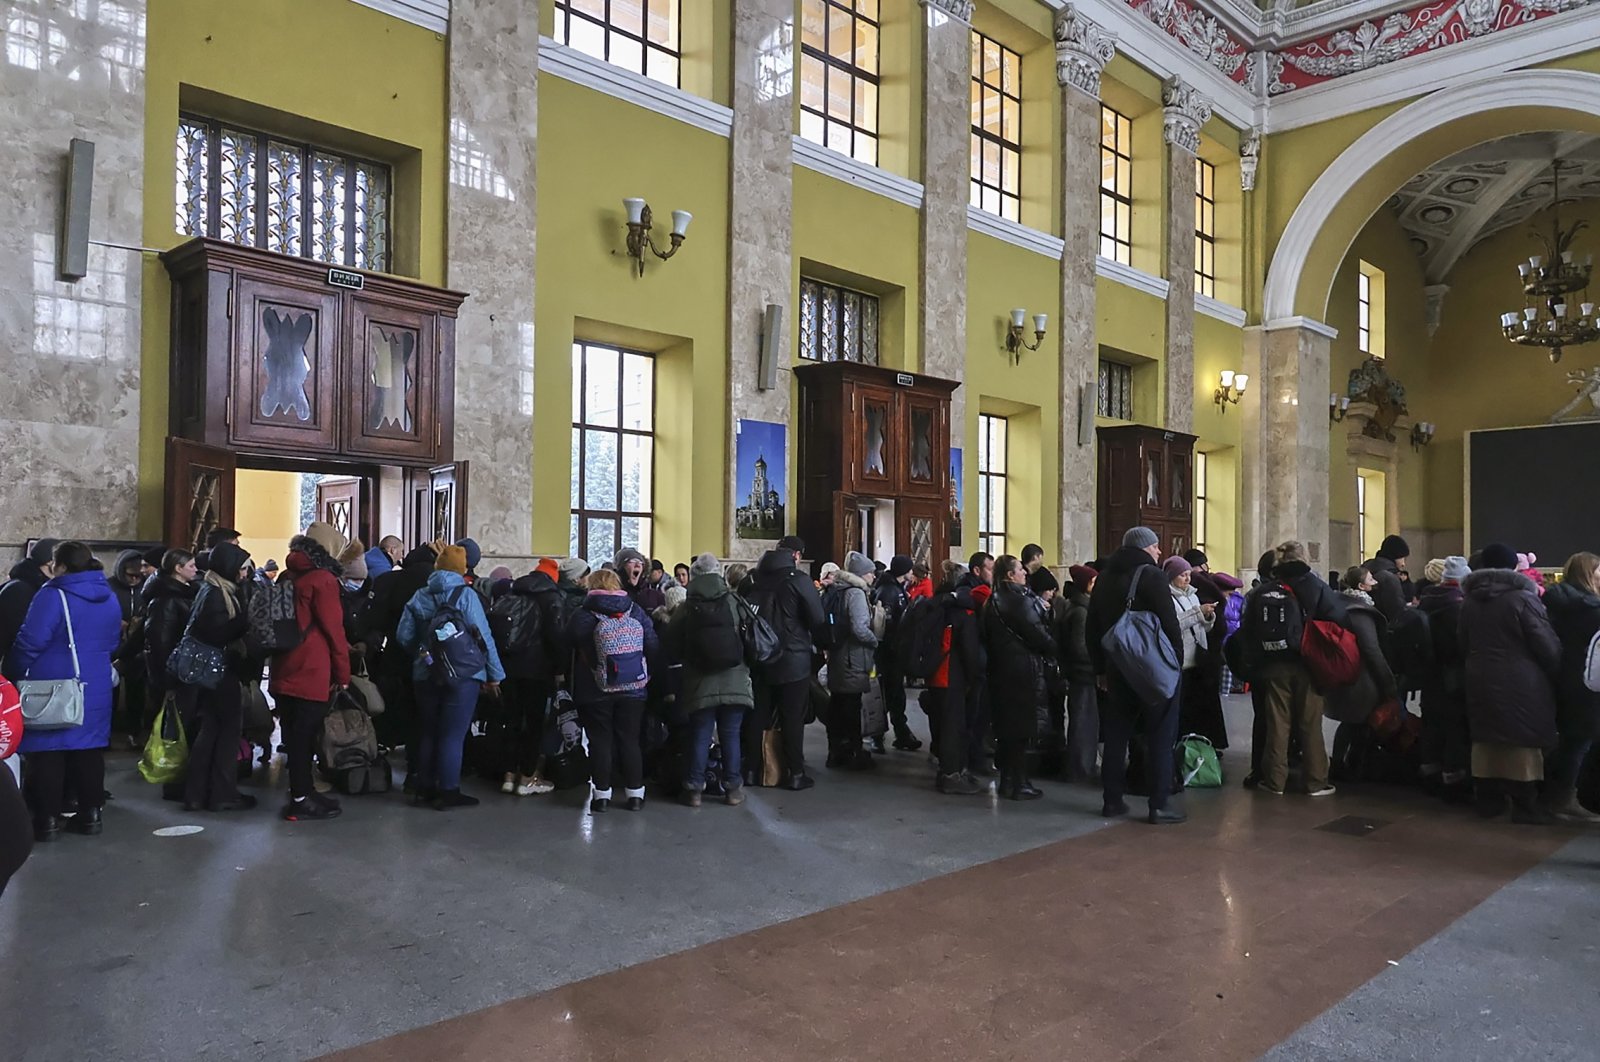 People wait for an evacuation train at a railway station in Kharkiv, Ukraine, March 3, 2022. (EPA Photo)